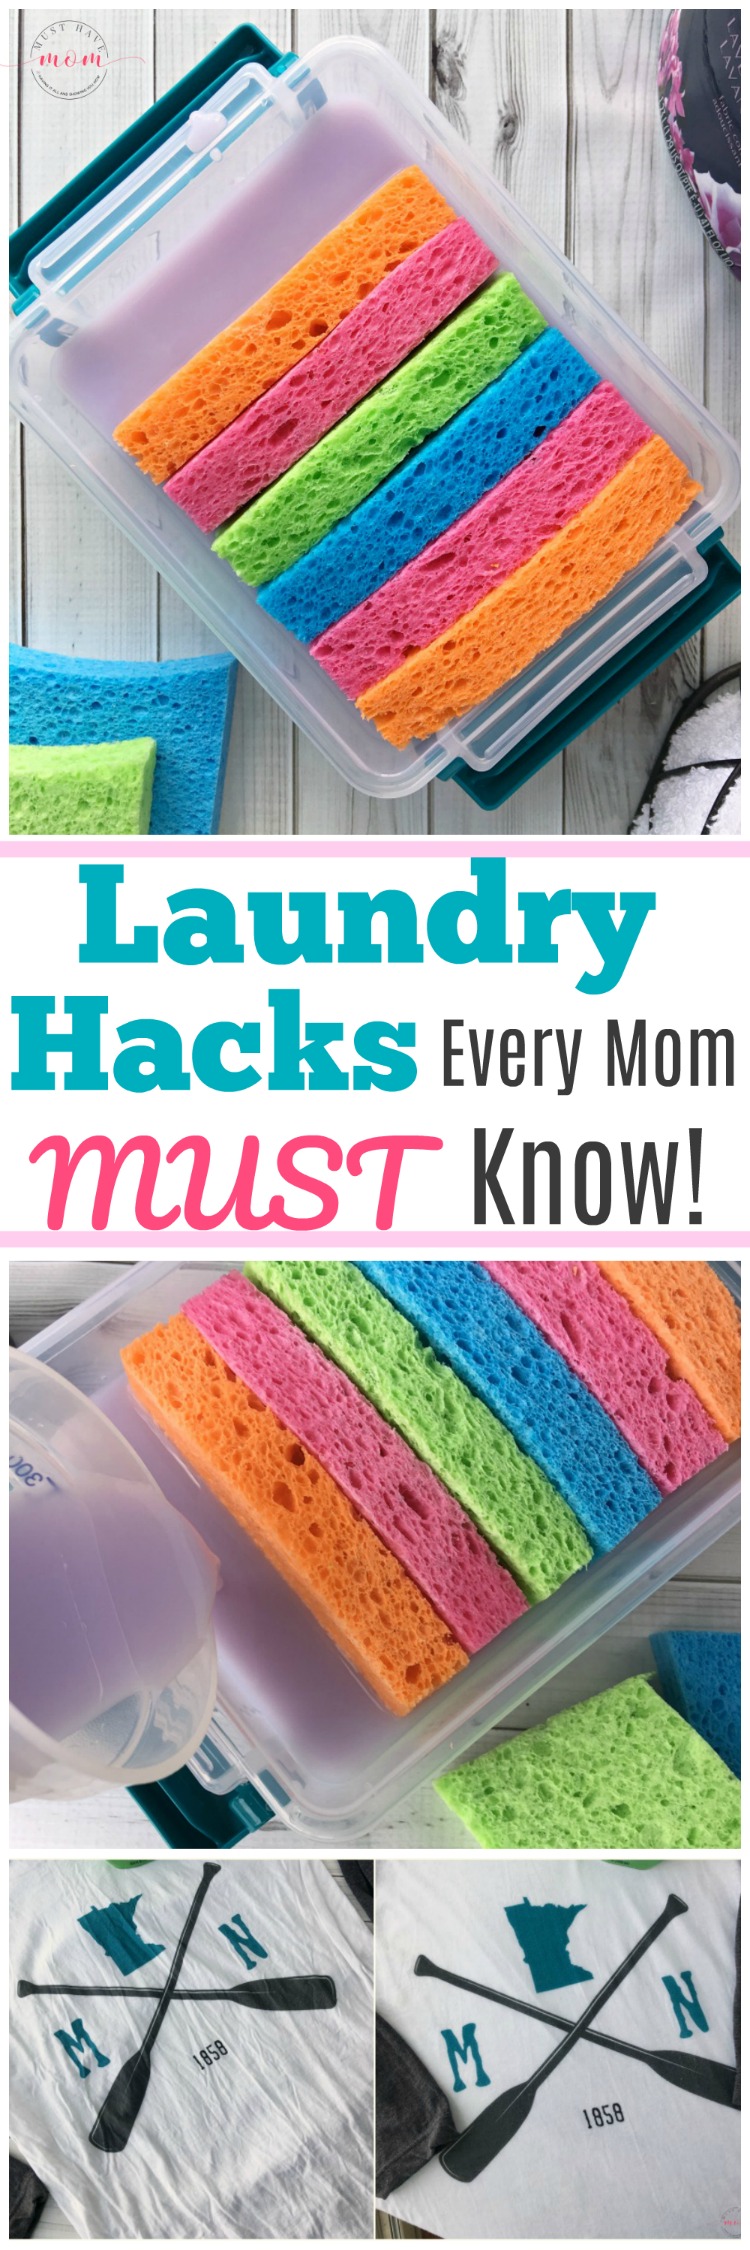 Laundry hacks every mom MUST know! How to get wrinkles out of clothes fast + make your own reusable dryer sheets!